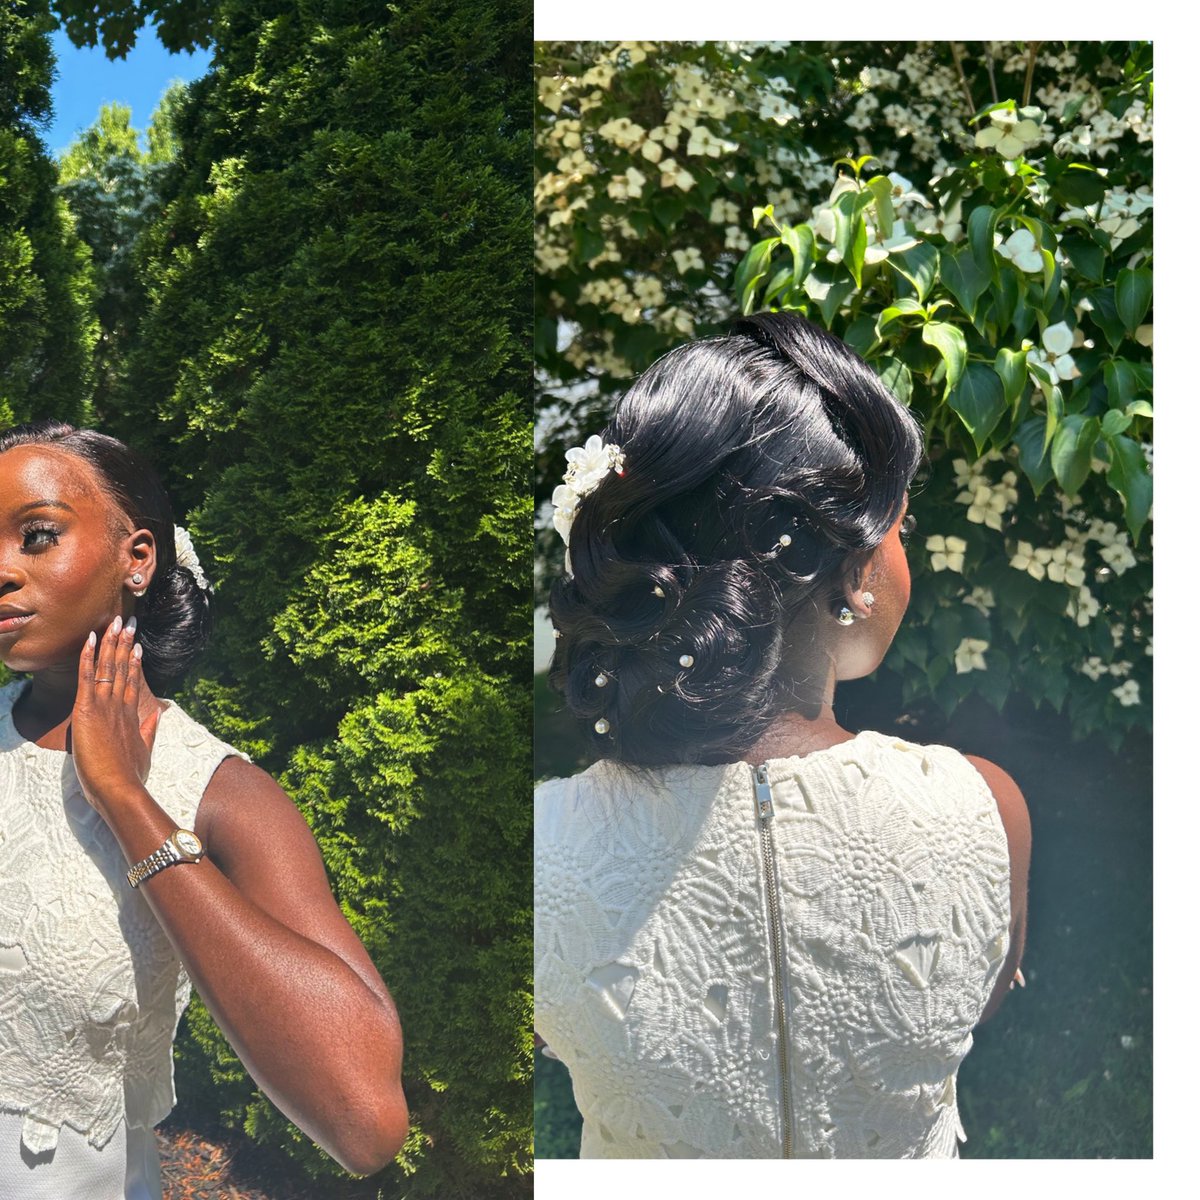 With a creative idea and teamwork, I present to you PROJECT 001: 
I thank my team for making it come to life🥰😘❤️

- Hair: @crafted_by_s 
- Model: @therealrenee4 
- Makeup: @yourfaceisartt 

#bridalmakeup #blackgirlmagic #blackbride #dmvhairstylist #dmvmodels #dmvmua